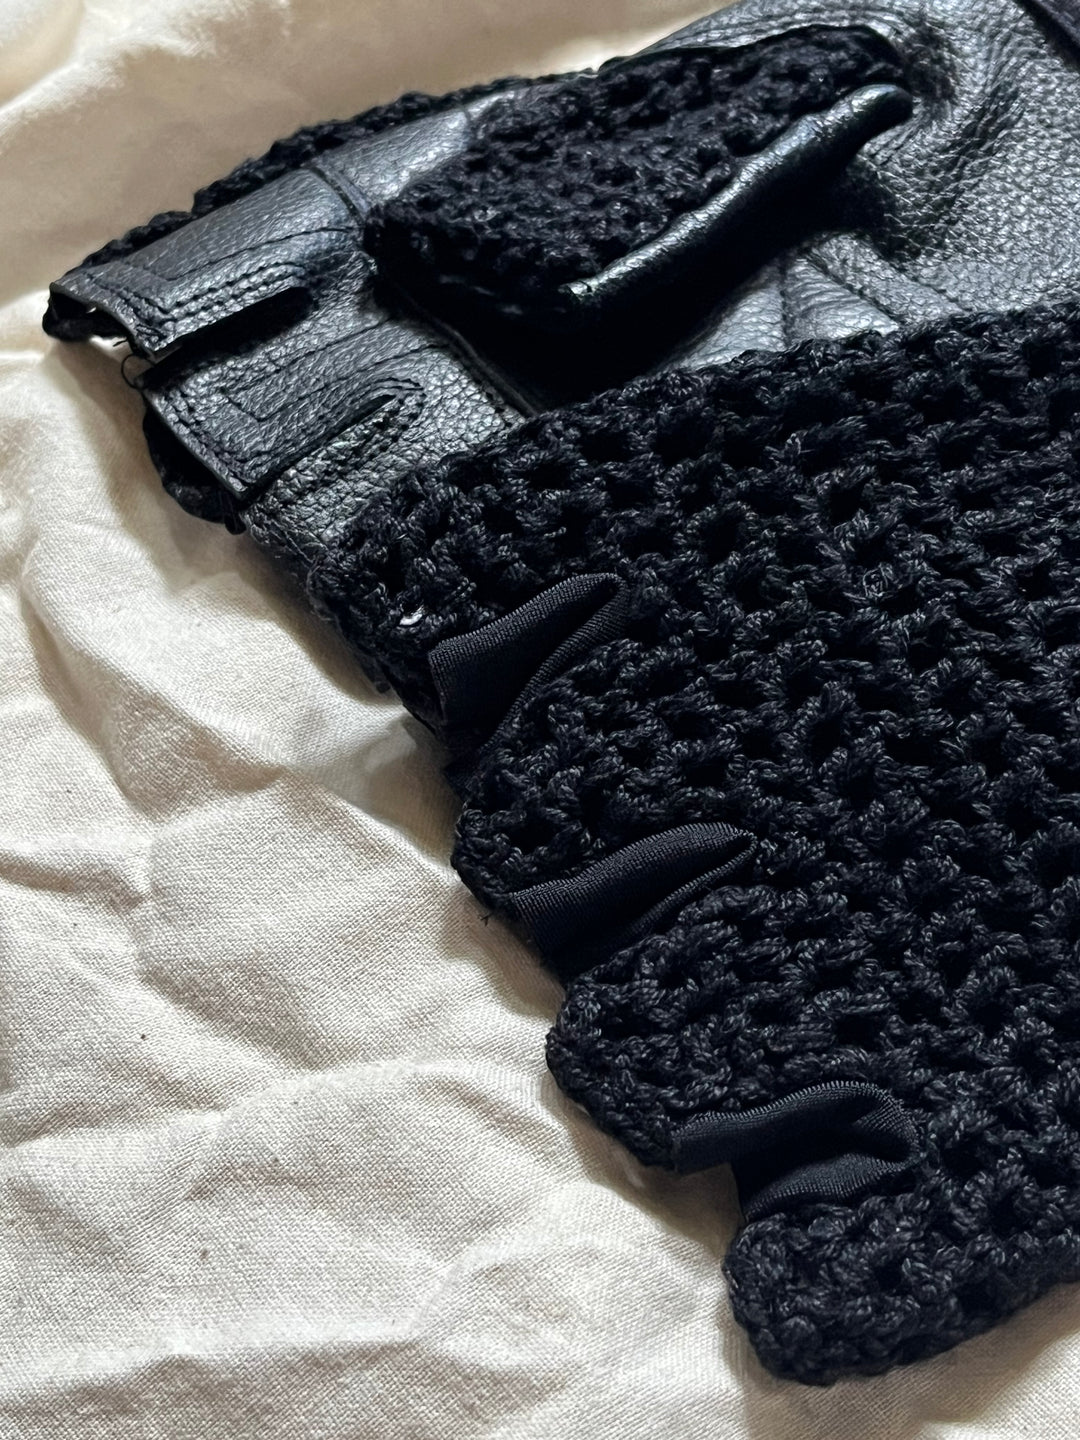 PASSE Leather Crocheted Gloves (Triple Black)